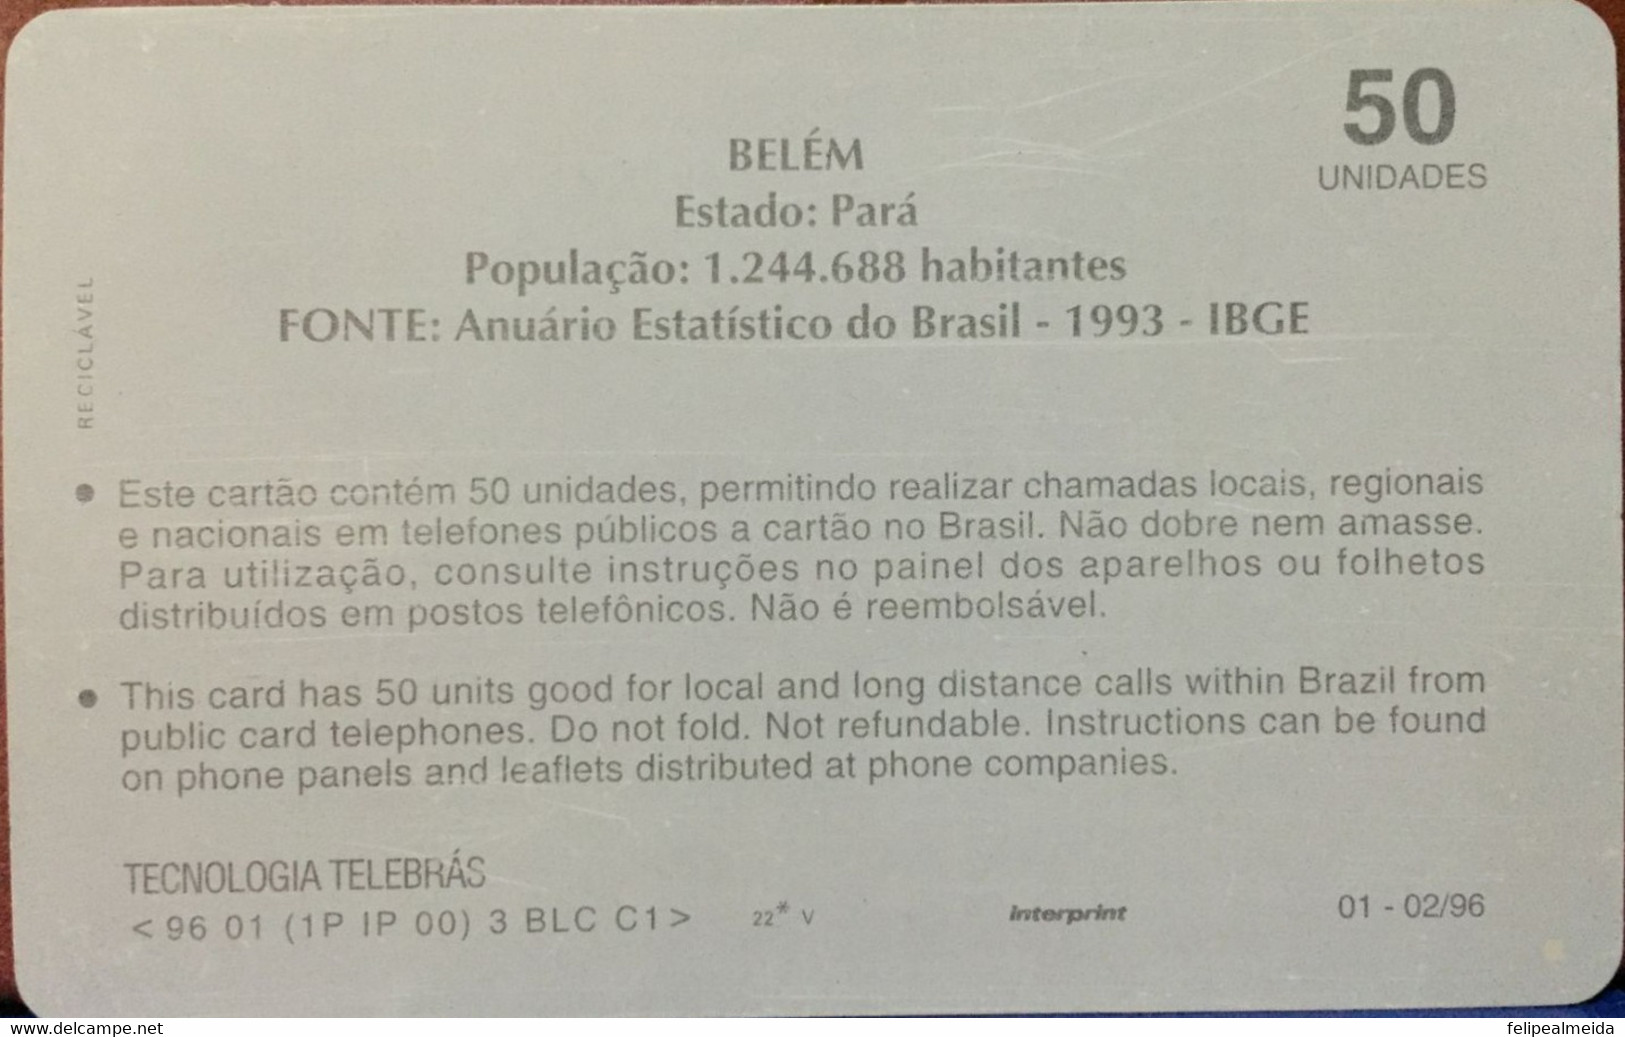 Phone Card Manufactured By Telebras In 1996 - Photo Belem Do Pará - Pará - Brazil - Statistical Yearbook Of Brazil 1993 - Culture